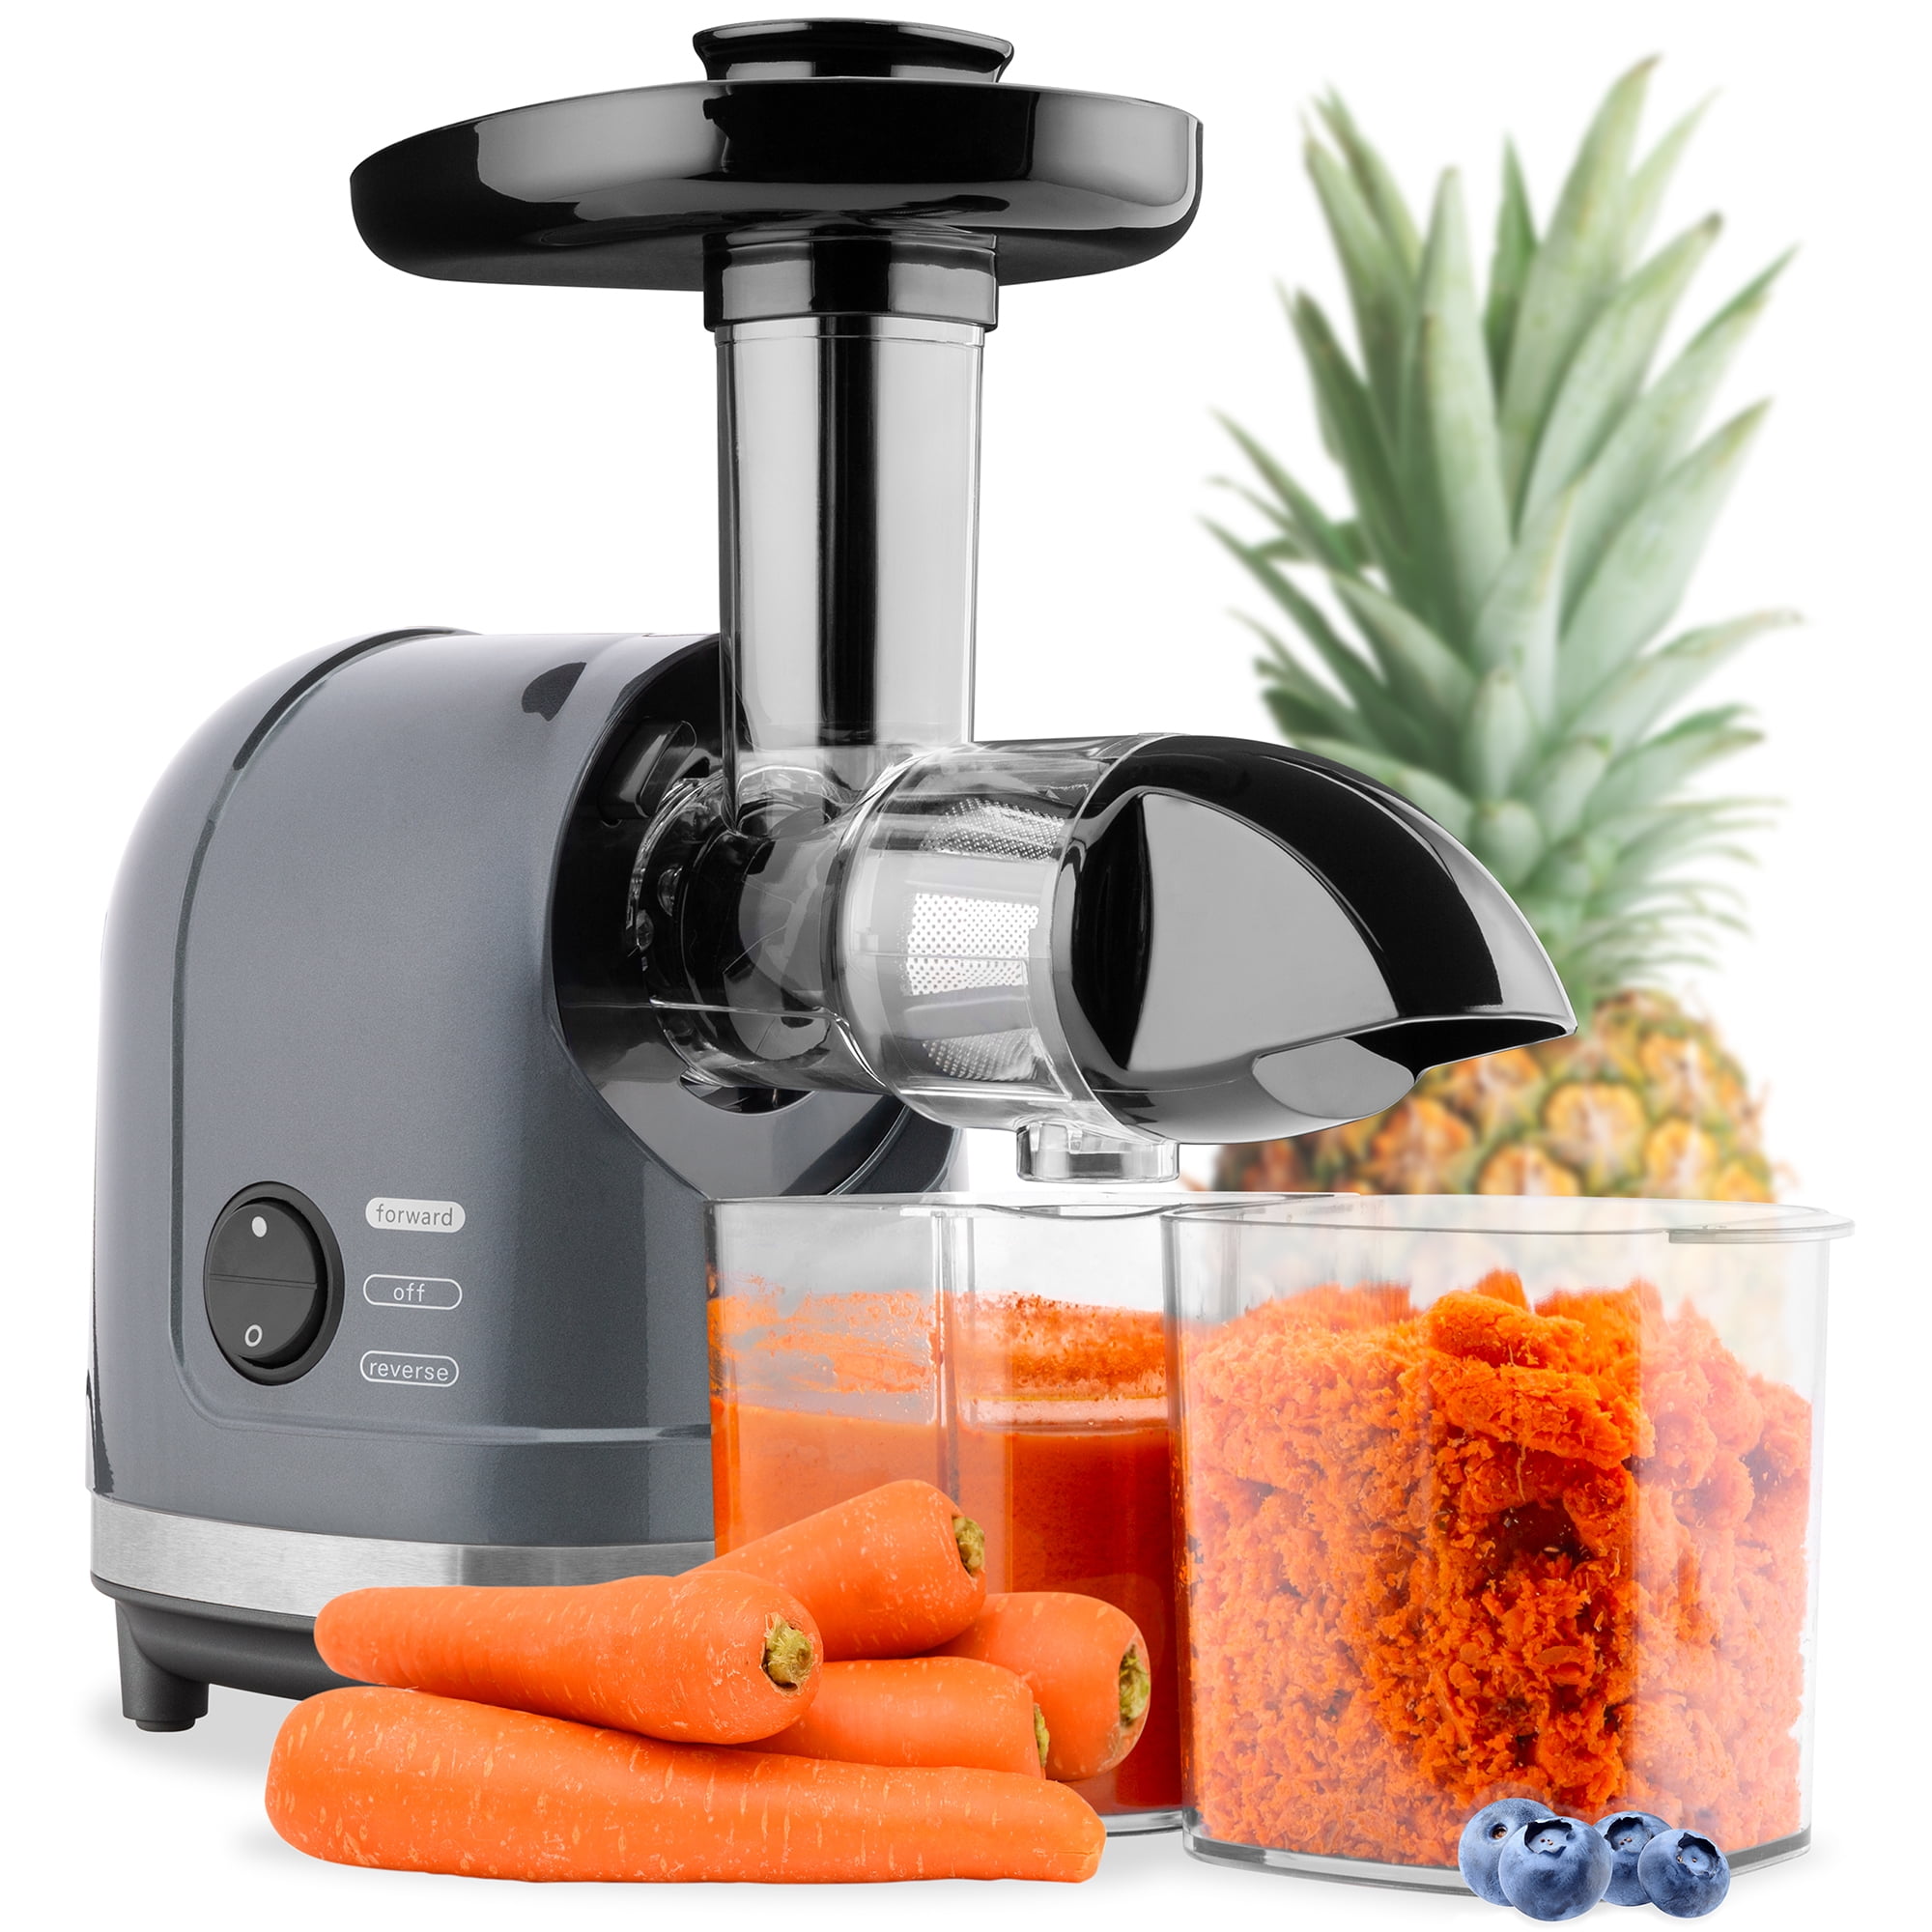 Lowest Noise High Nutrient Juice Reducing Oxidation with Cleaning Brush Bigger Container OUTAD 150W Low Speed Masticating Juicer Extractor Cold Press Juicer 